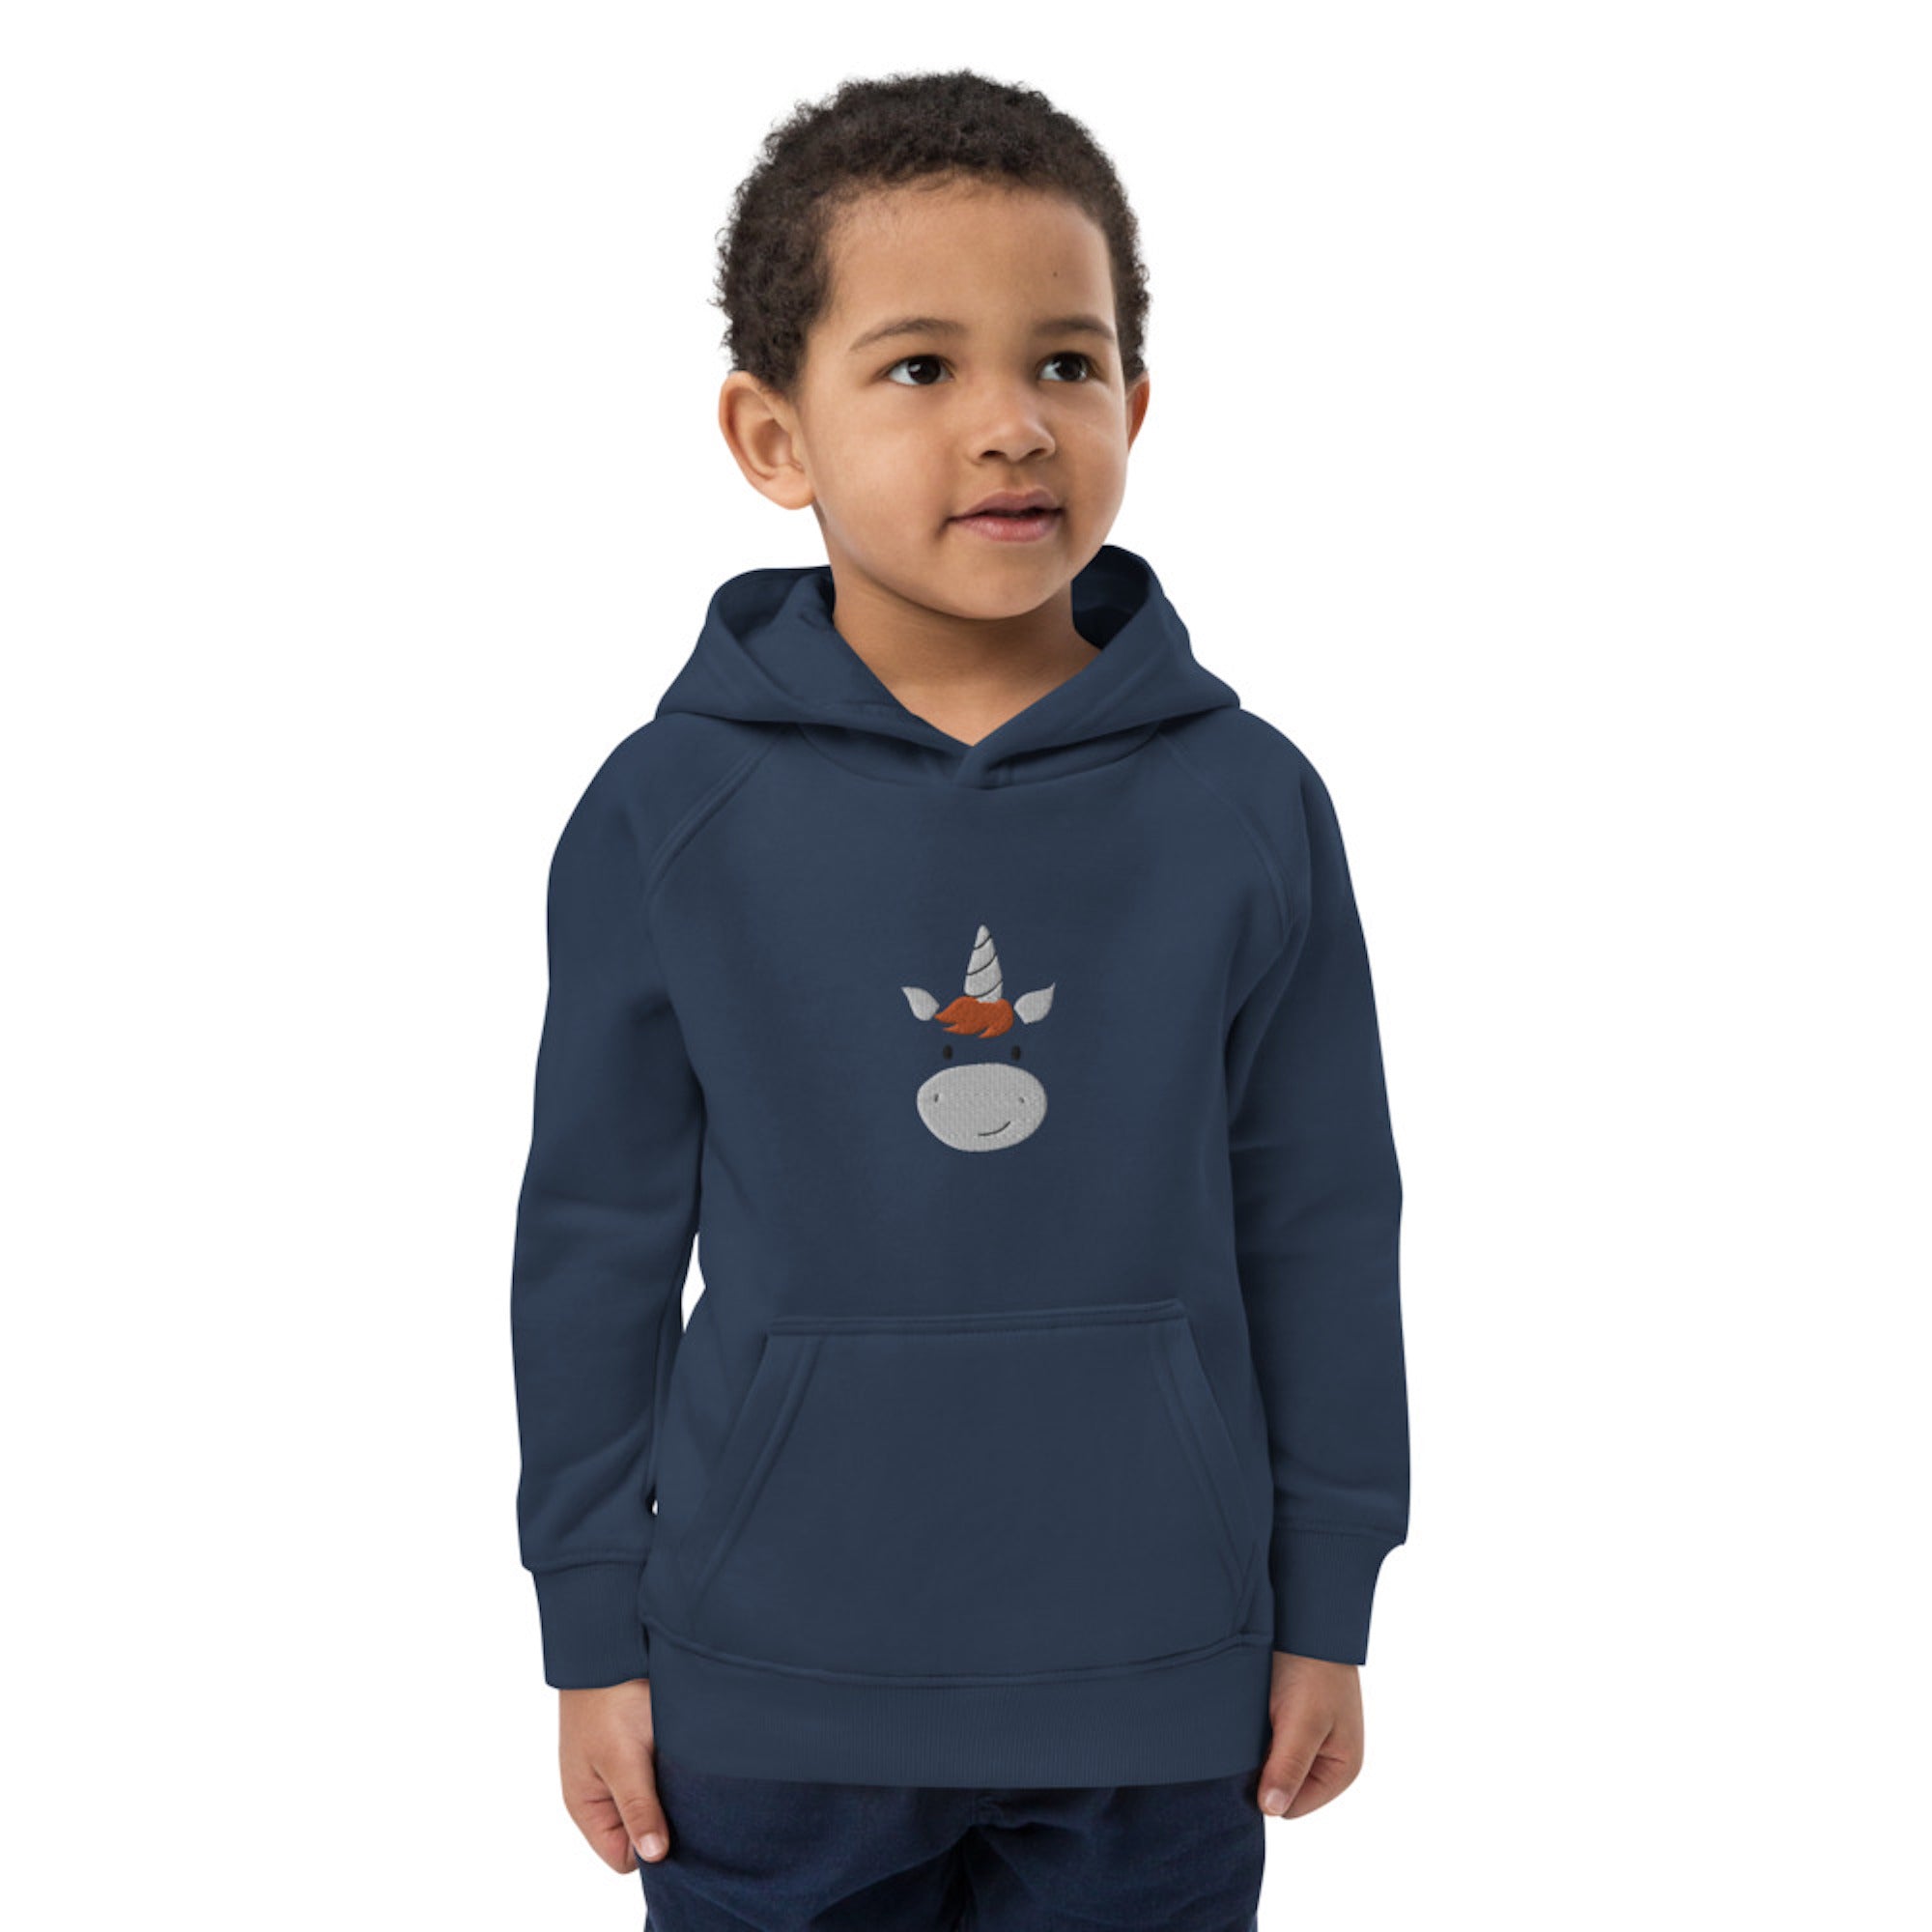 Unicorn Kids Eco Hoodie with cute animals, Organic Cotton pullover for children in black, gift idea for kids, soft hoodie for kids-2